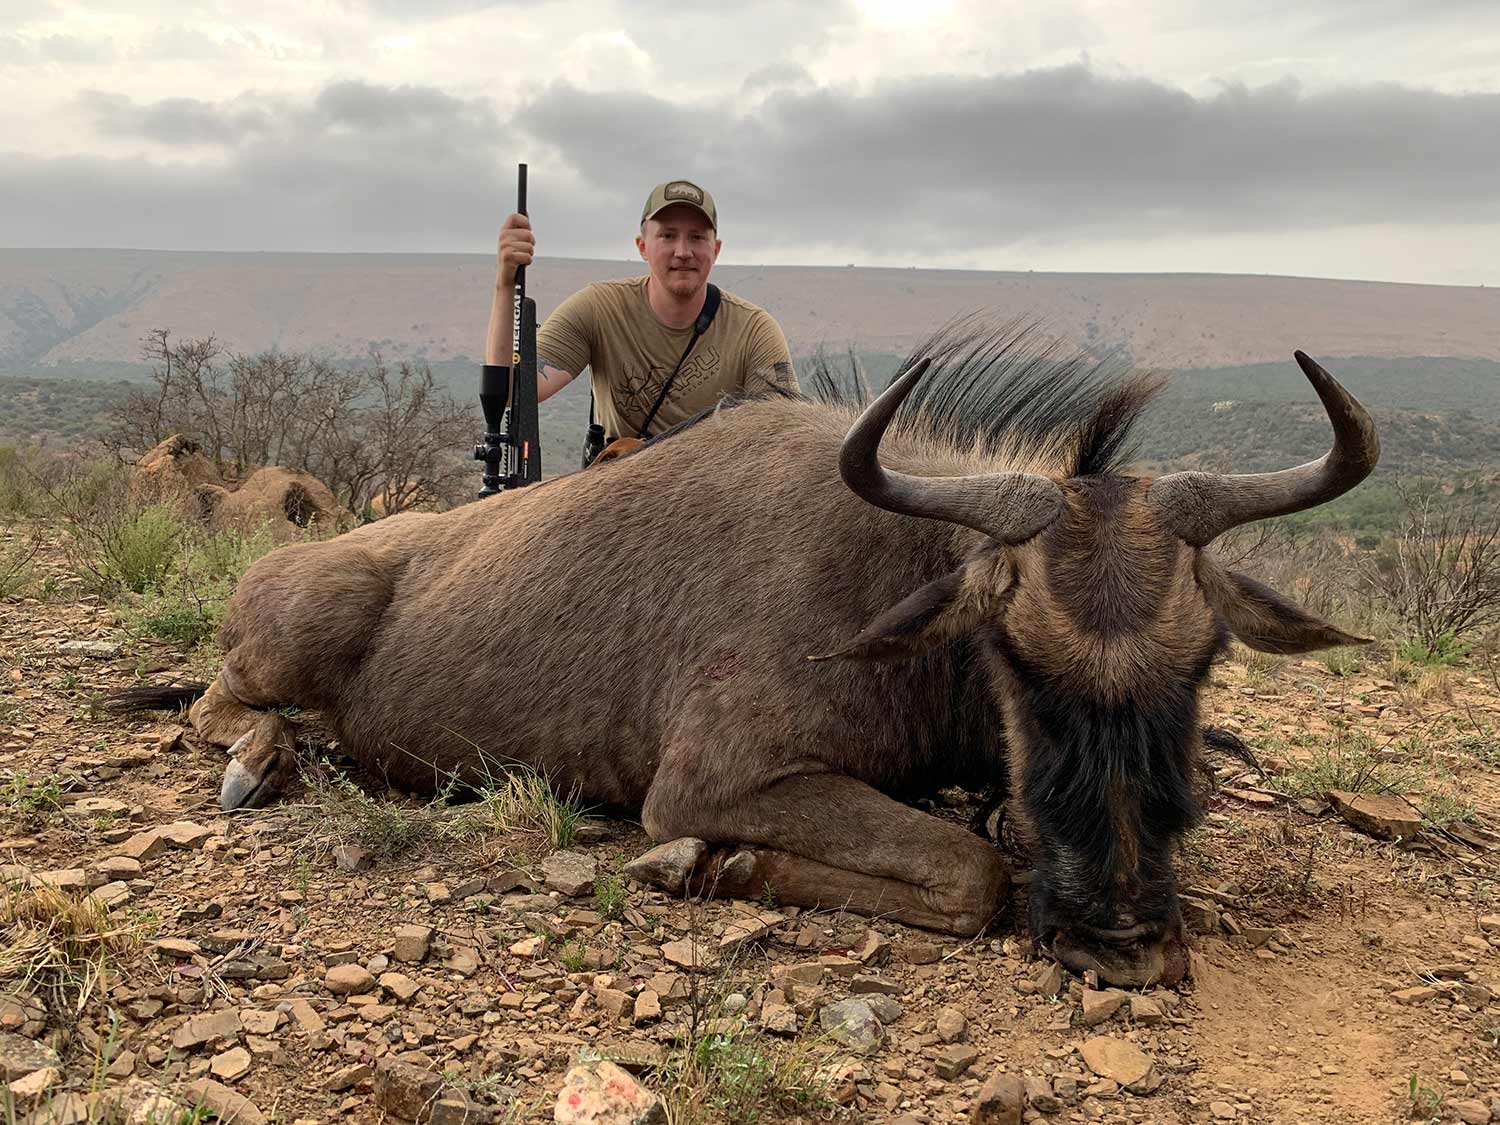 A hunter kneeling behind a mature blue wildebeest on an African hunting trip.